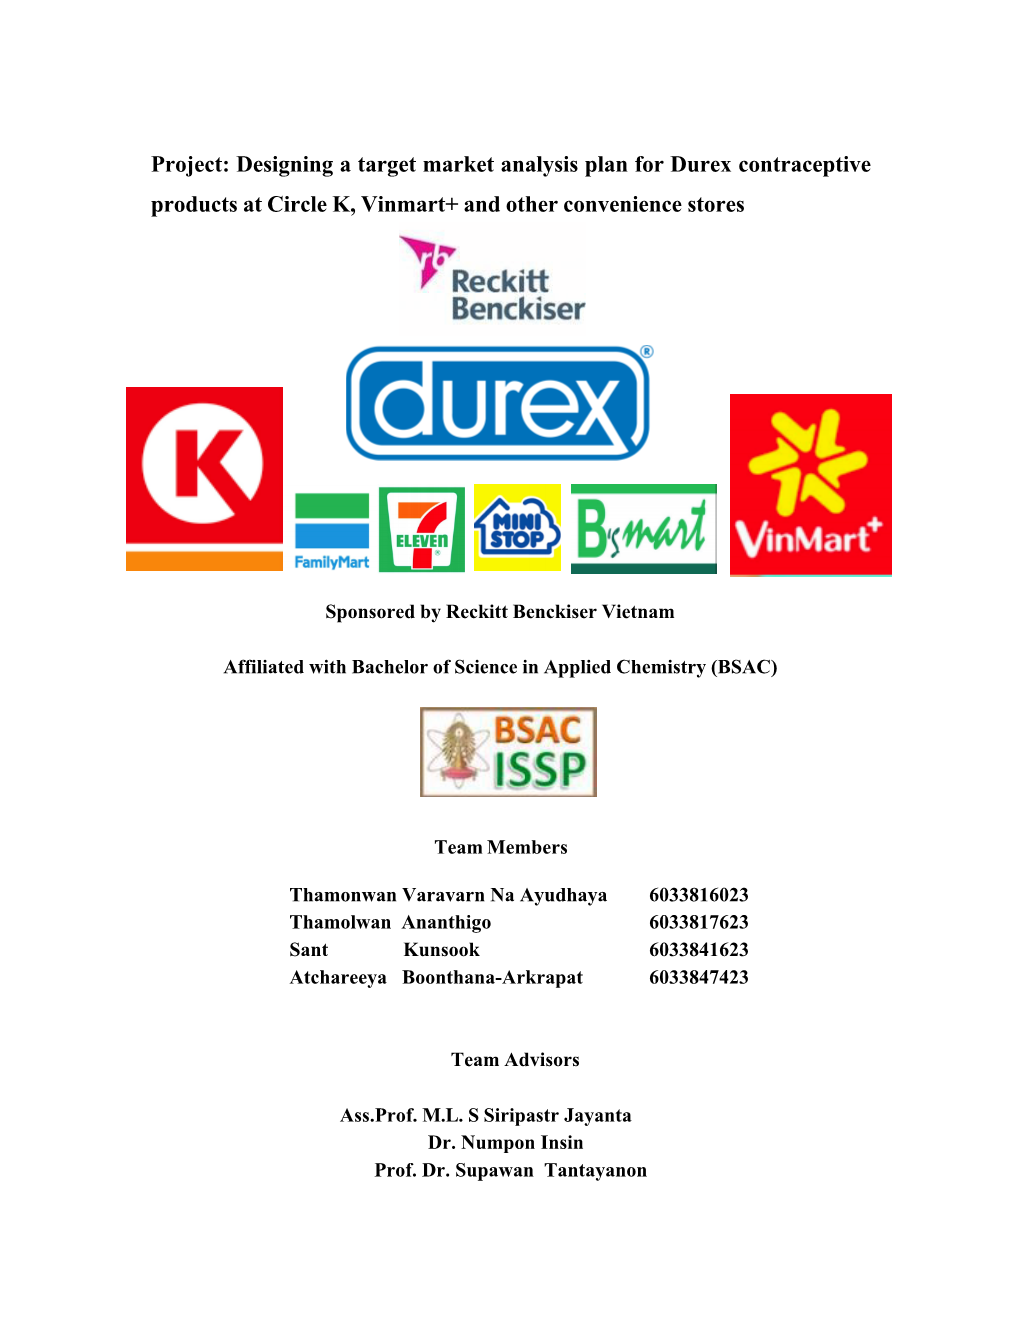 Project: Designing a Target Market Analysis Plan for Durex Contraceptive Products at Circle K, Vinmart+ and Other Convenience Stores